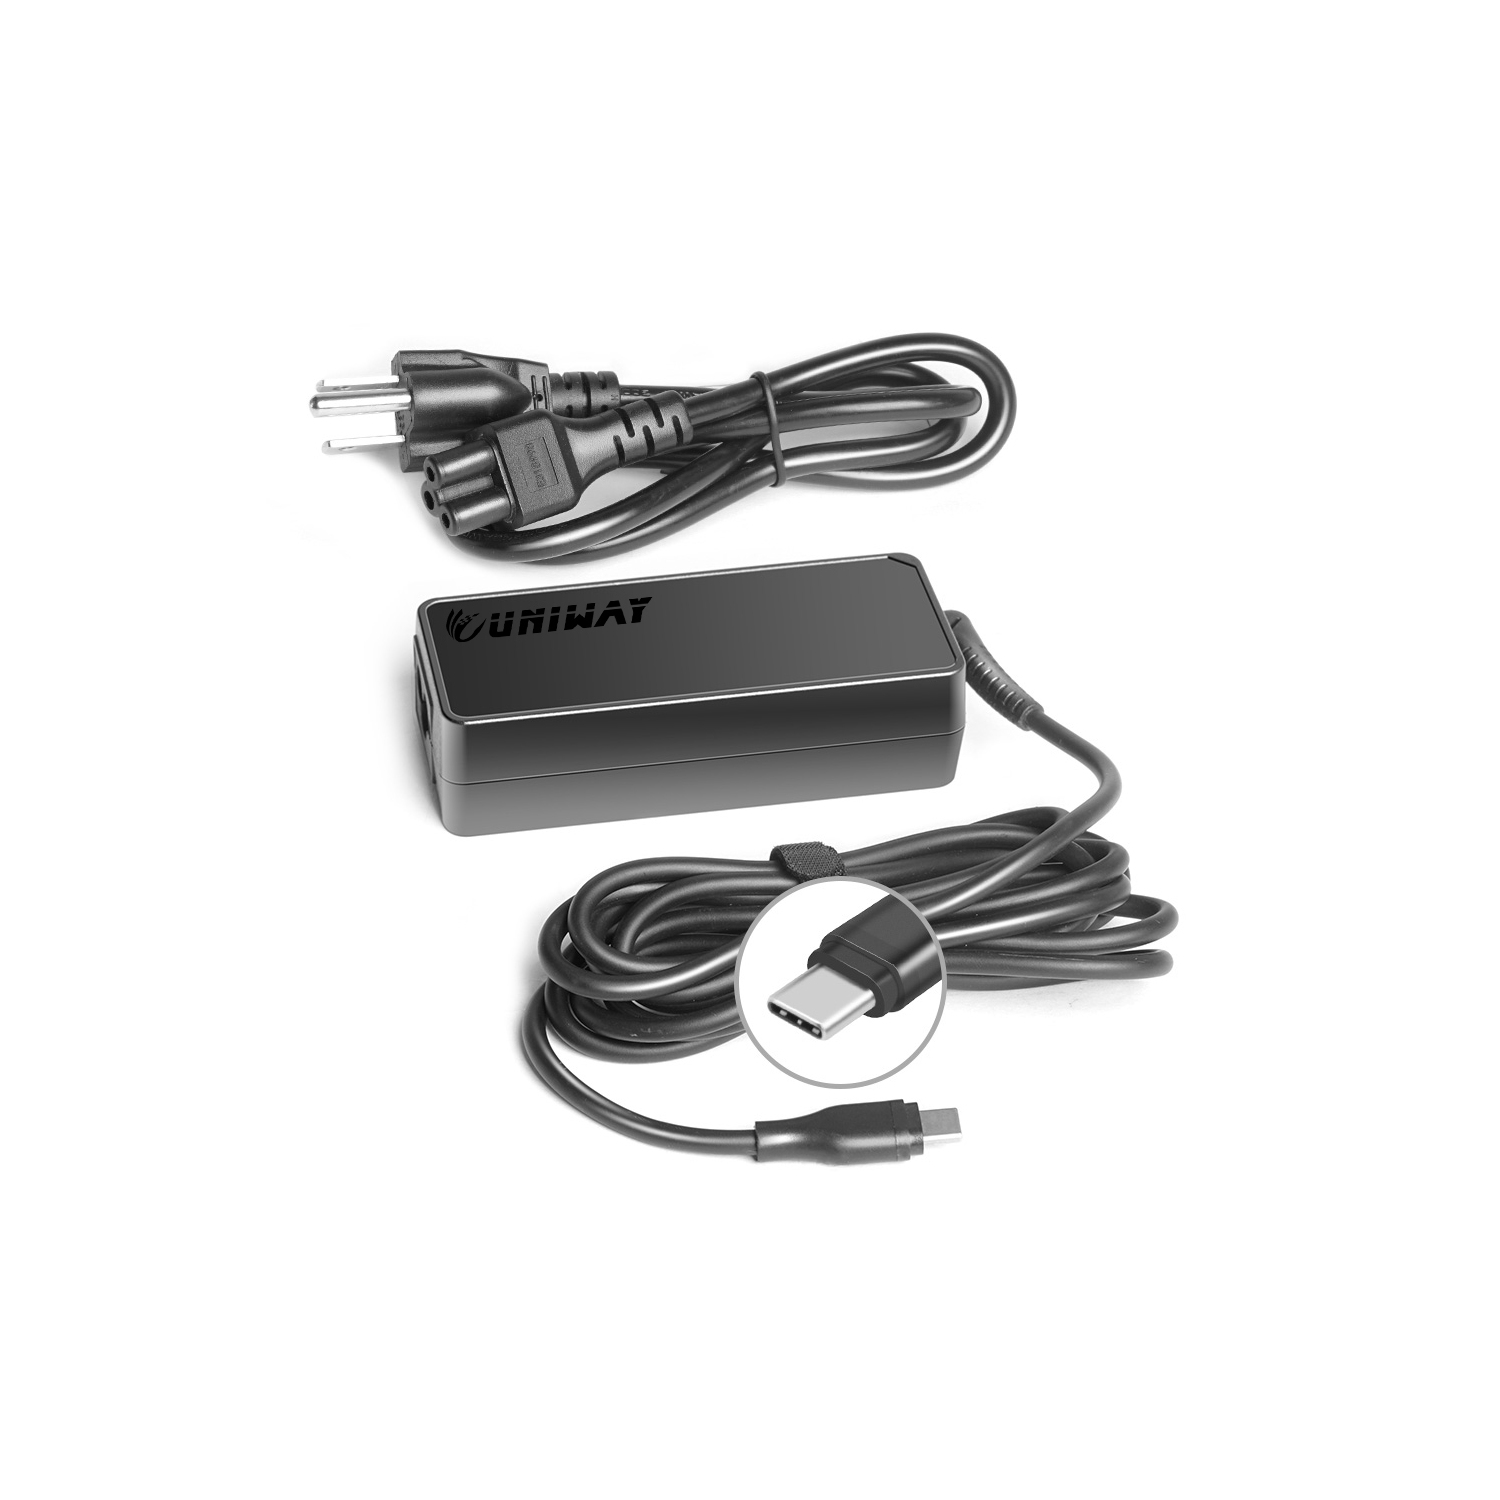 Laptop AC Adapter Charger 100W USB C Type-C for HP DELL LENOVO SAMSUNG ASUS MSI ACER SONY LG TOSHIBA worldwide use power supply